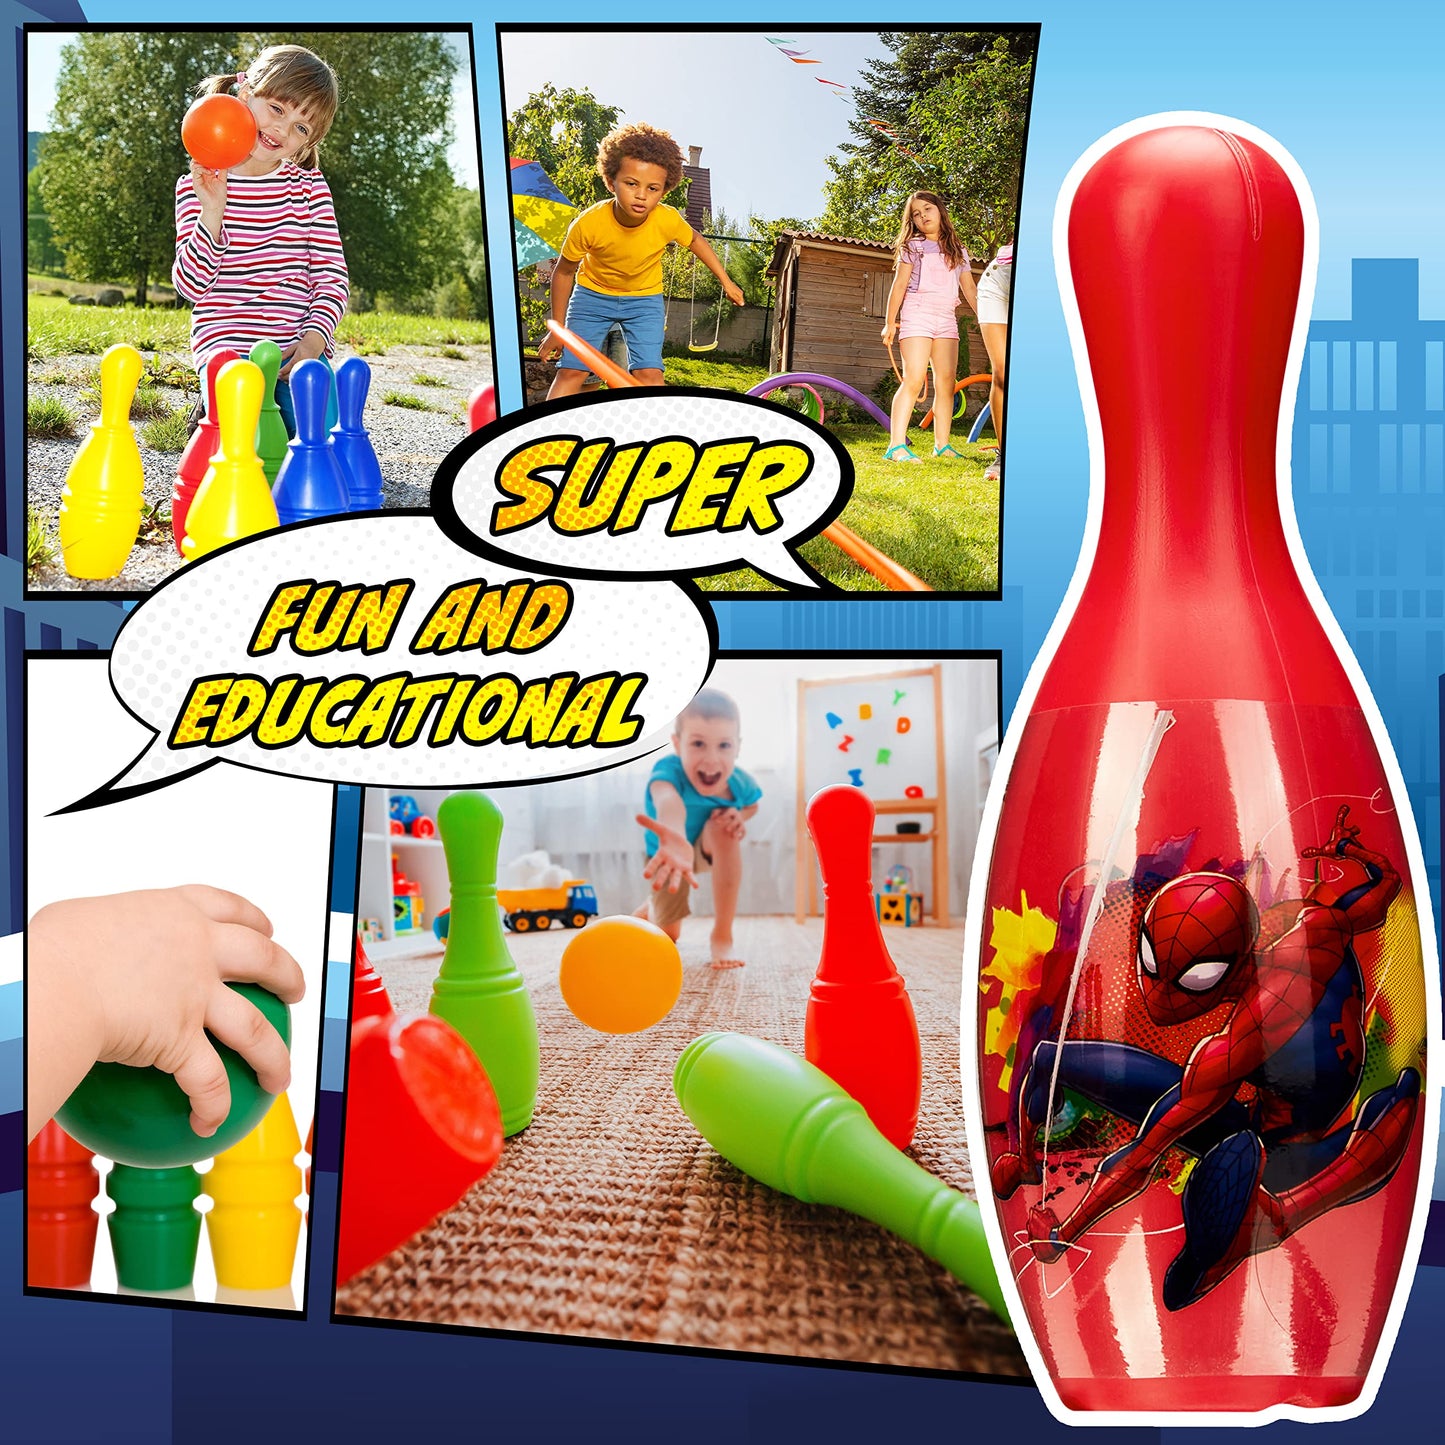 Marvel Spiderman Bowling Set Kids 1 Ball 6 Pins Skittles Game for Kids Summer Garden Toys Indoor Outdoor Games Bowling Game Party Birthday Spiderman Gifts for Boys (Multi Spiderman)